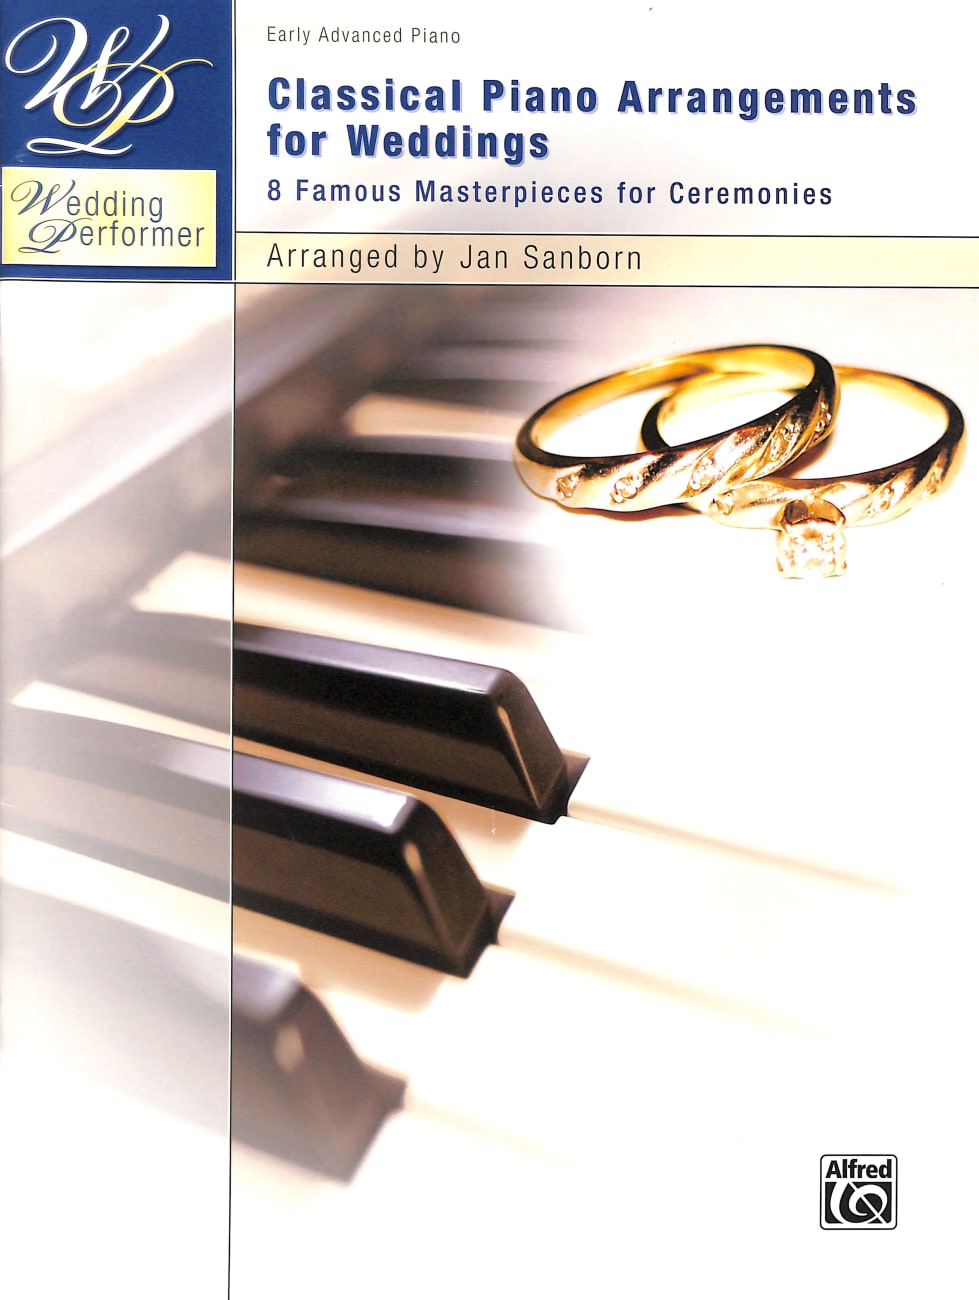 Wedding Performer: Classical Piano Arrangements For Weddings:8 Famous Masterpieces For Ceremonies (Early Advanced Piano) (Music Book) Paperback